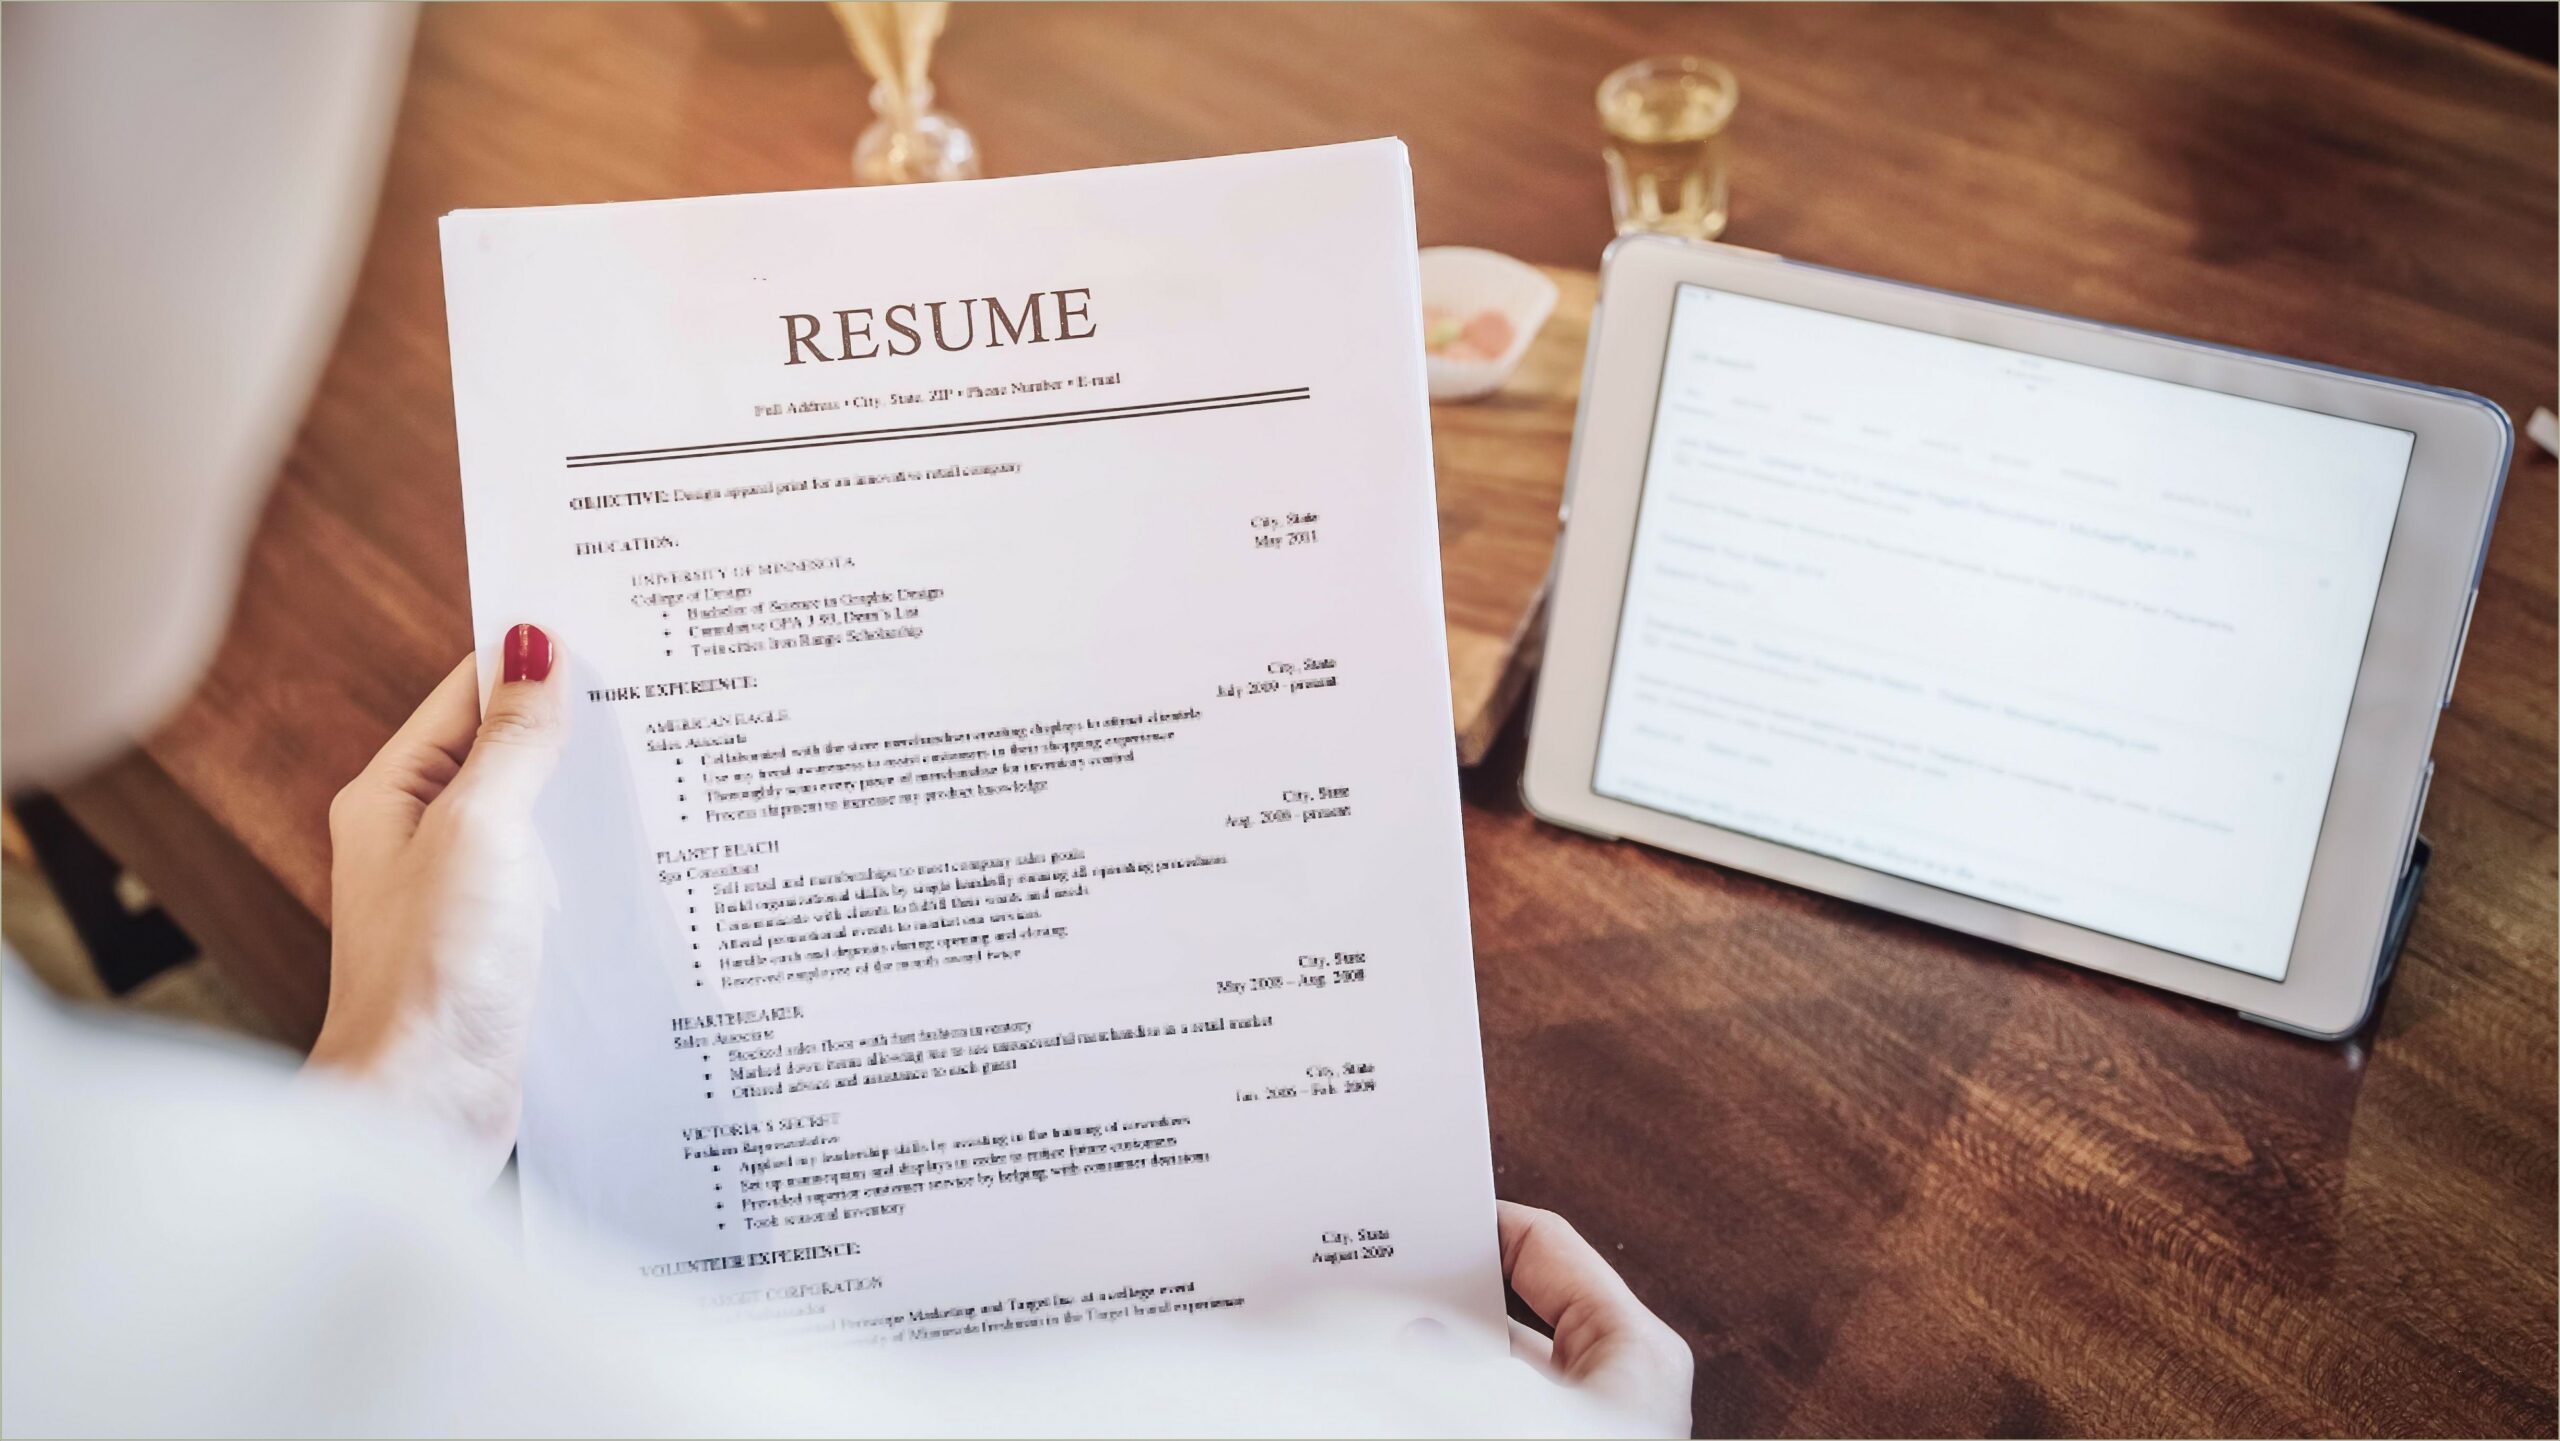 Find Jobs According To The Resume